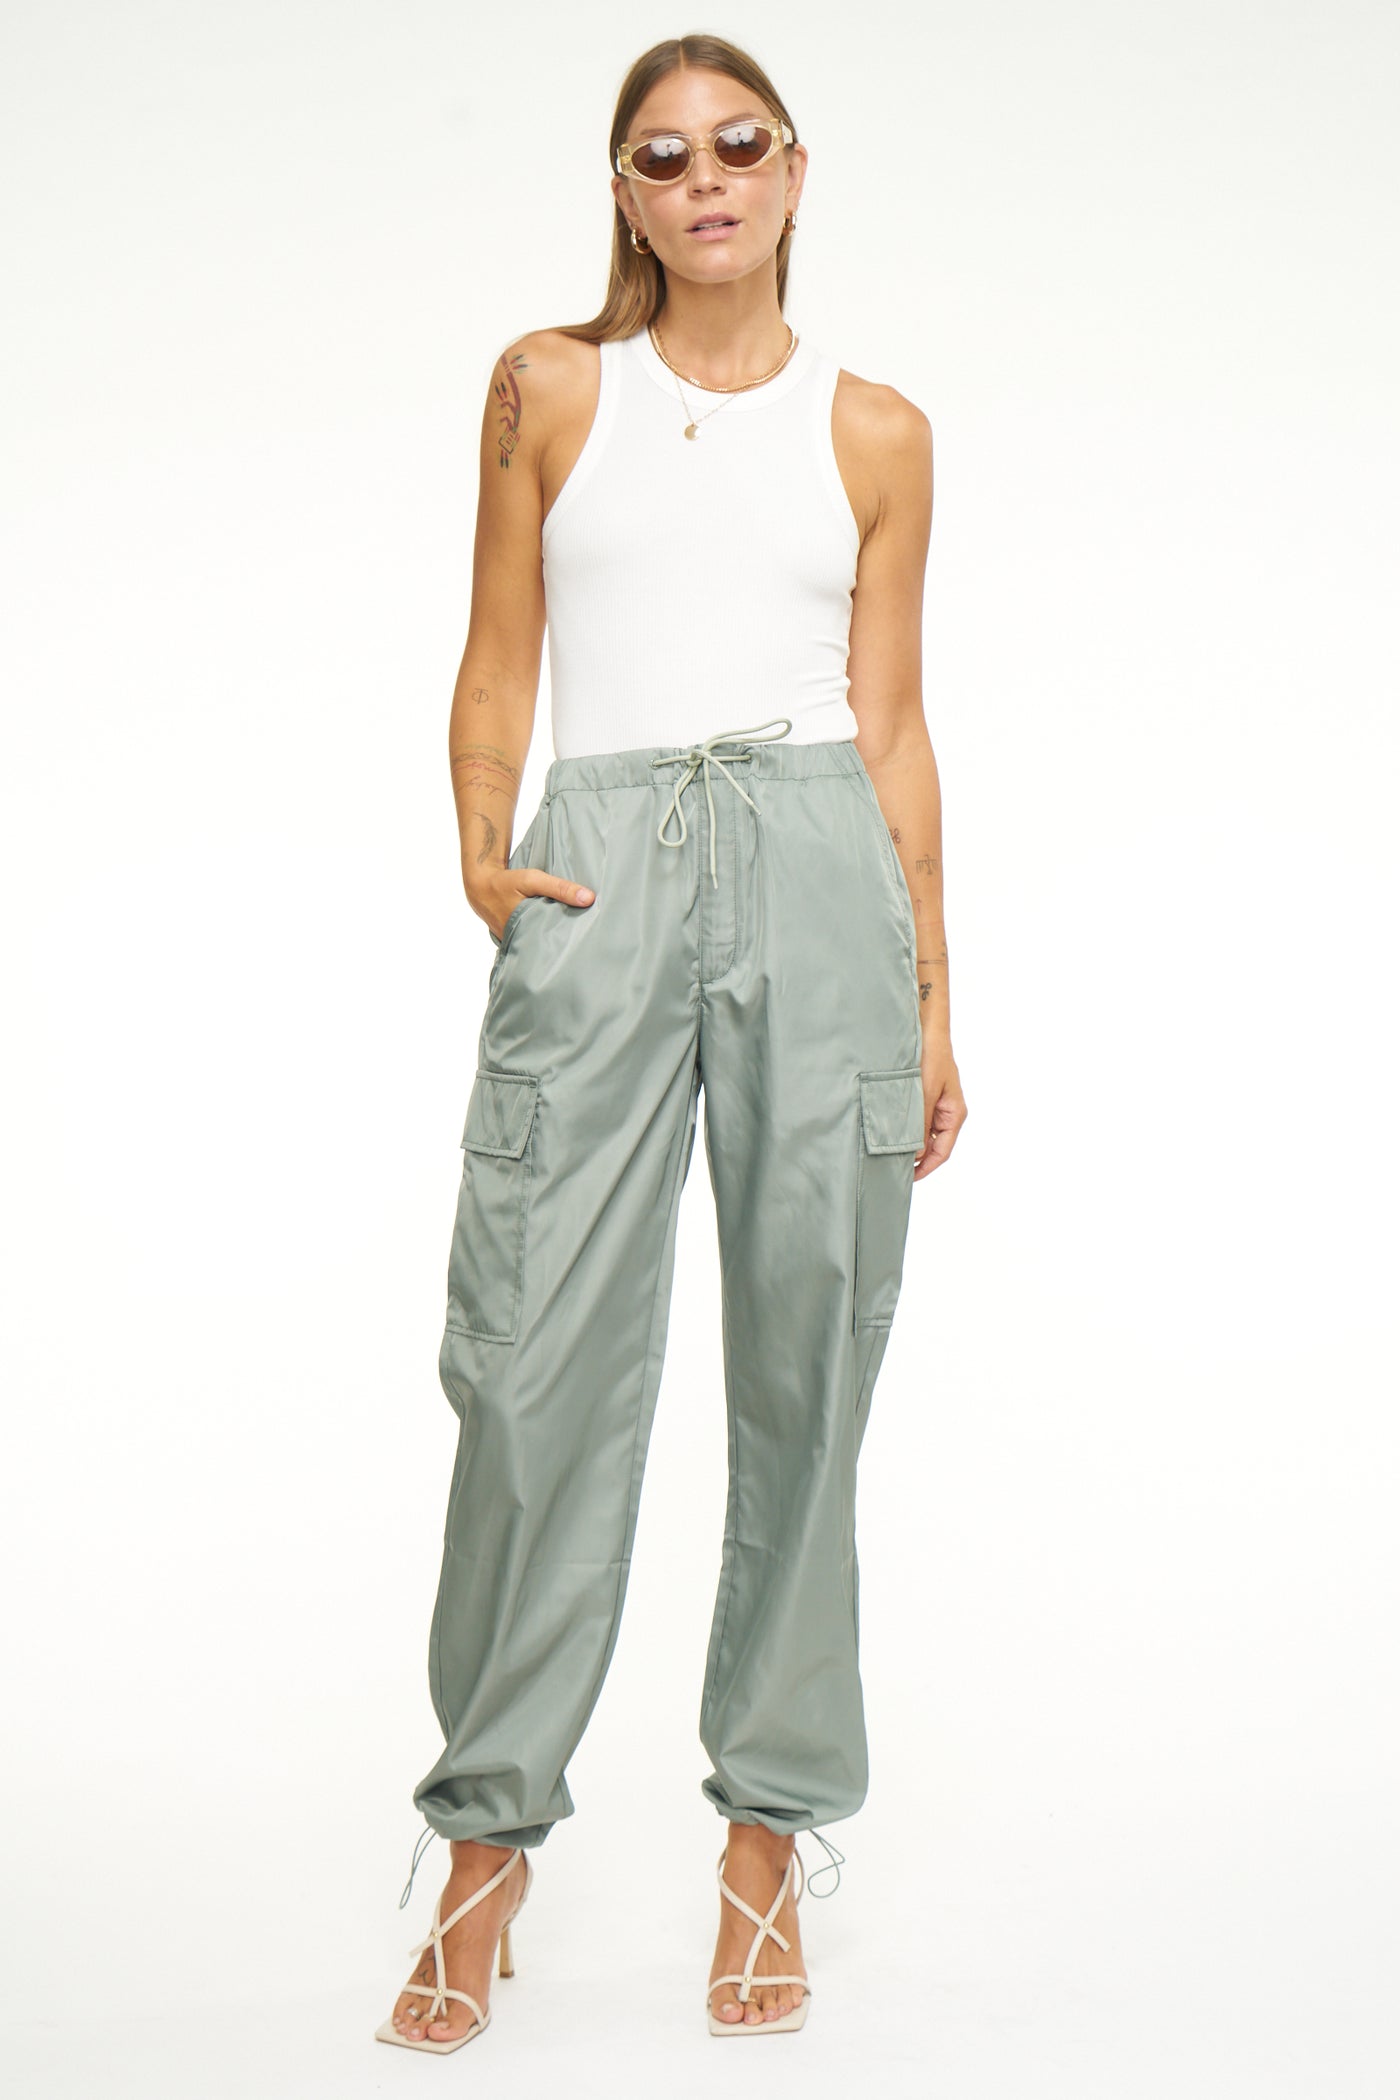 Pants at Injeanius | Designer Brands to Elevate Your Every Day 